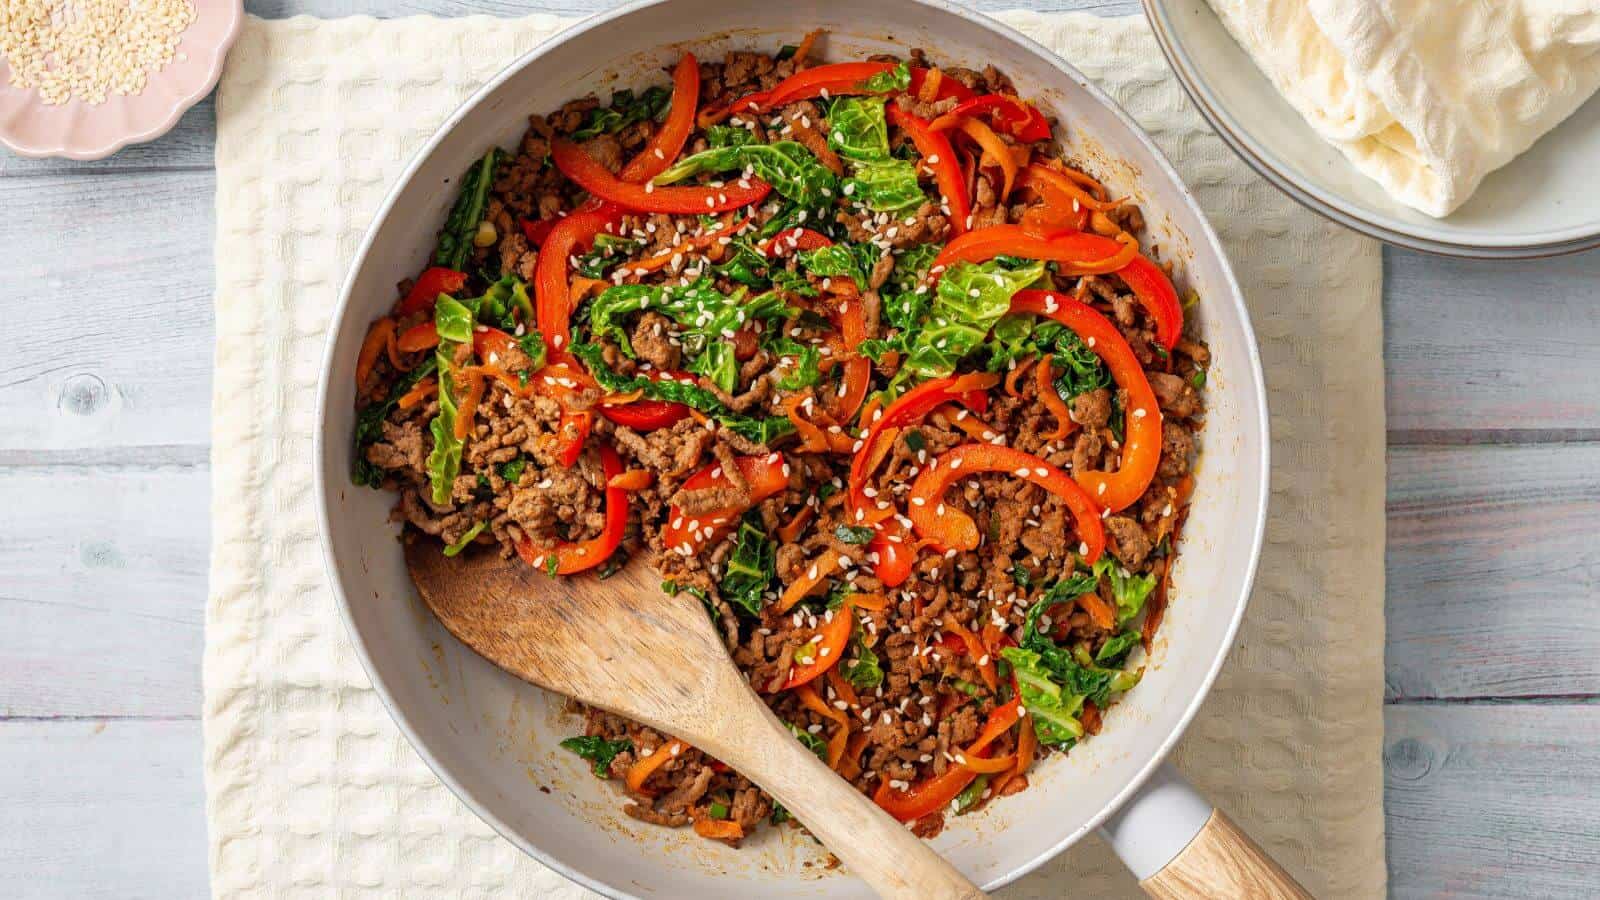 A skillet containing a stir-fried mix of ground meat, sliced bell peppers, leafy greens, and white sesame seeds, with a wooden spoon resting on the side. Plates with flatbreads are in the background.